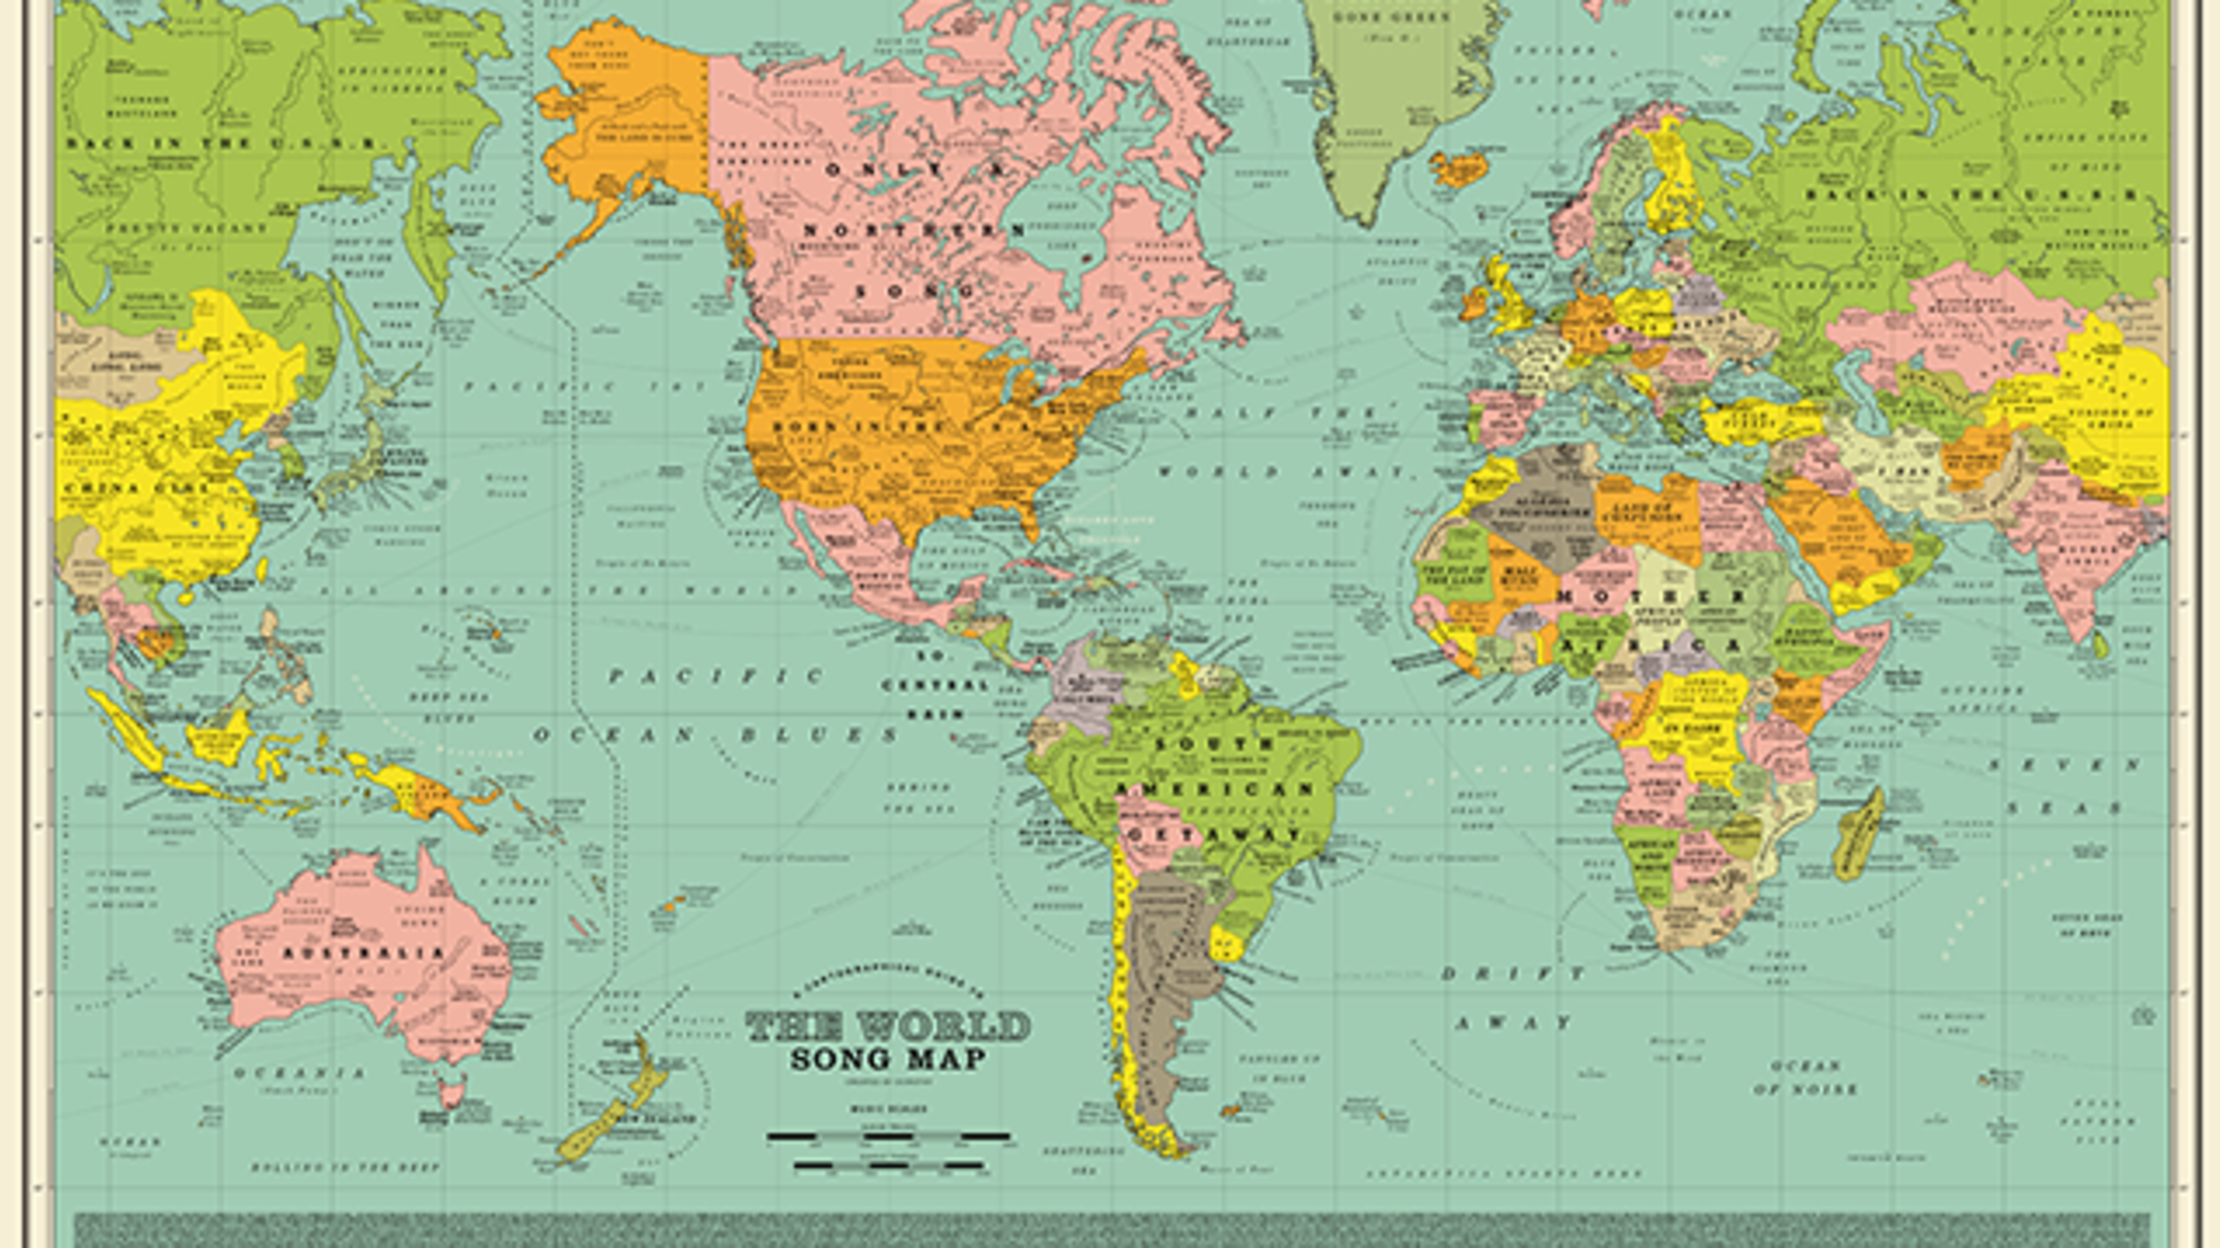 World Map With Every Country Musical World Map Showcases Songs About Every Country | Mental Floss